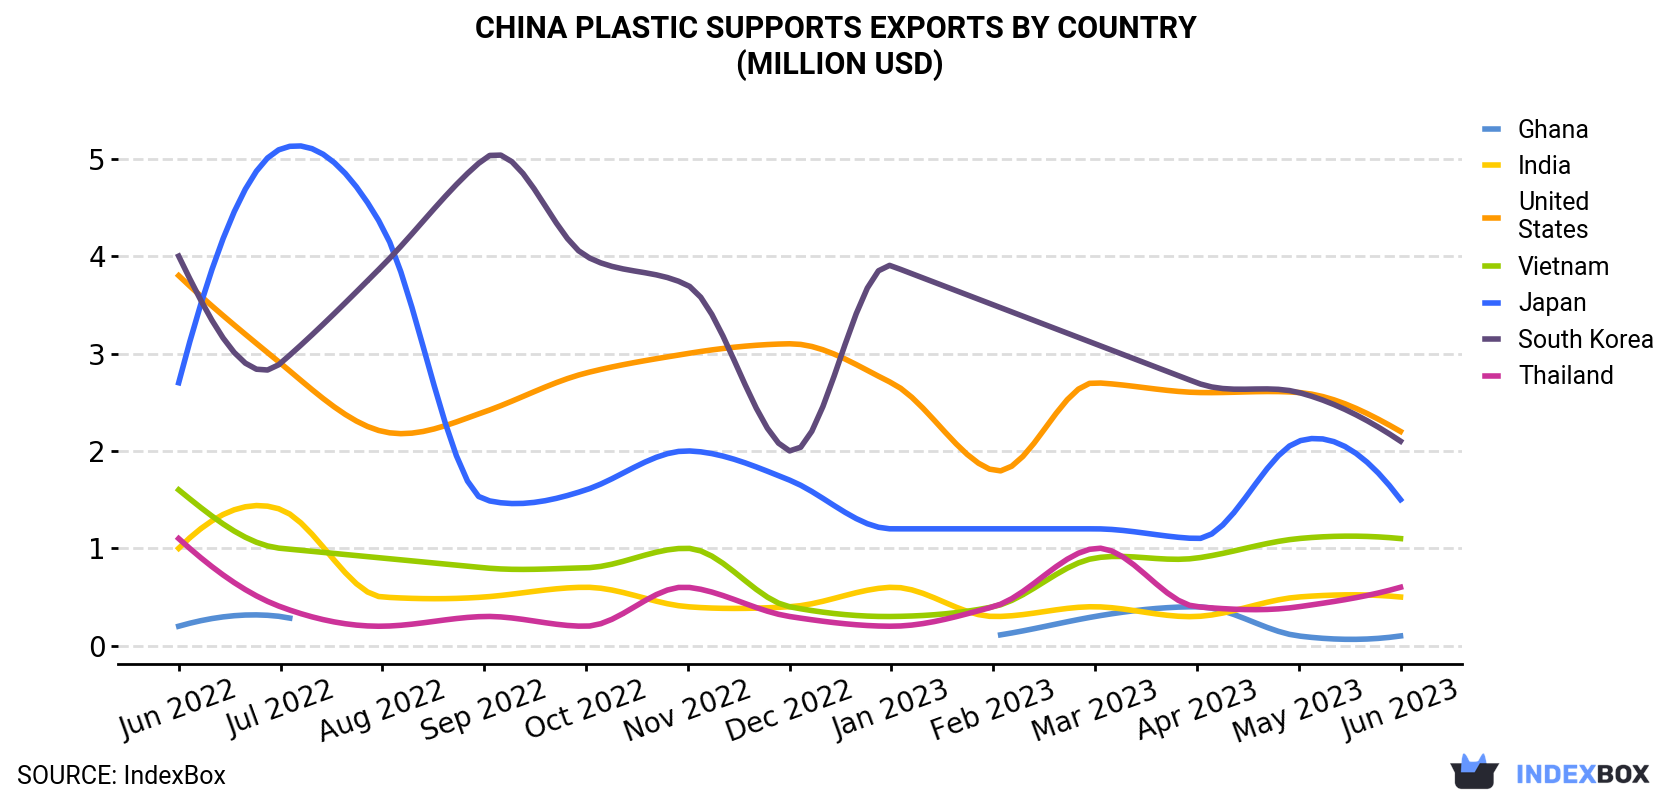 China Plastic Supports Exports By Country (Million USD)